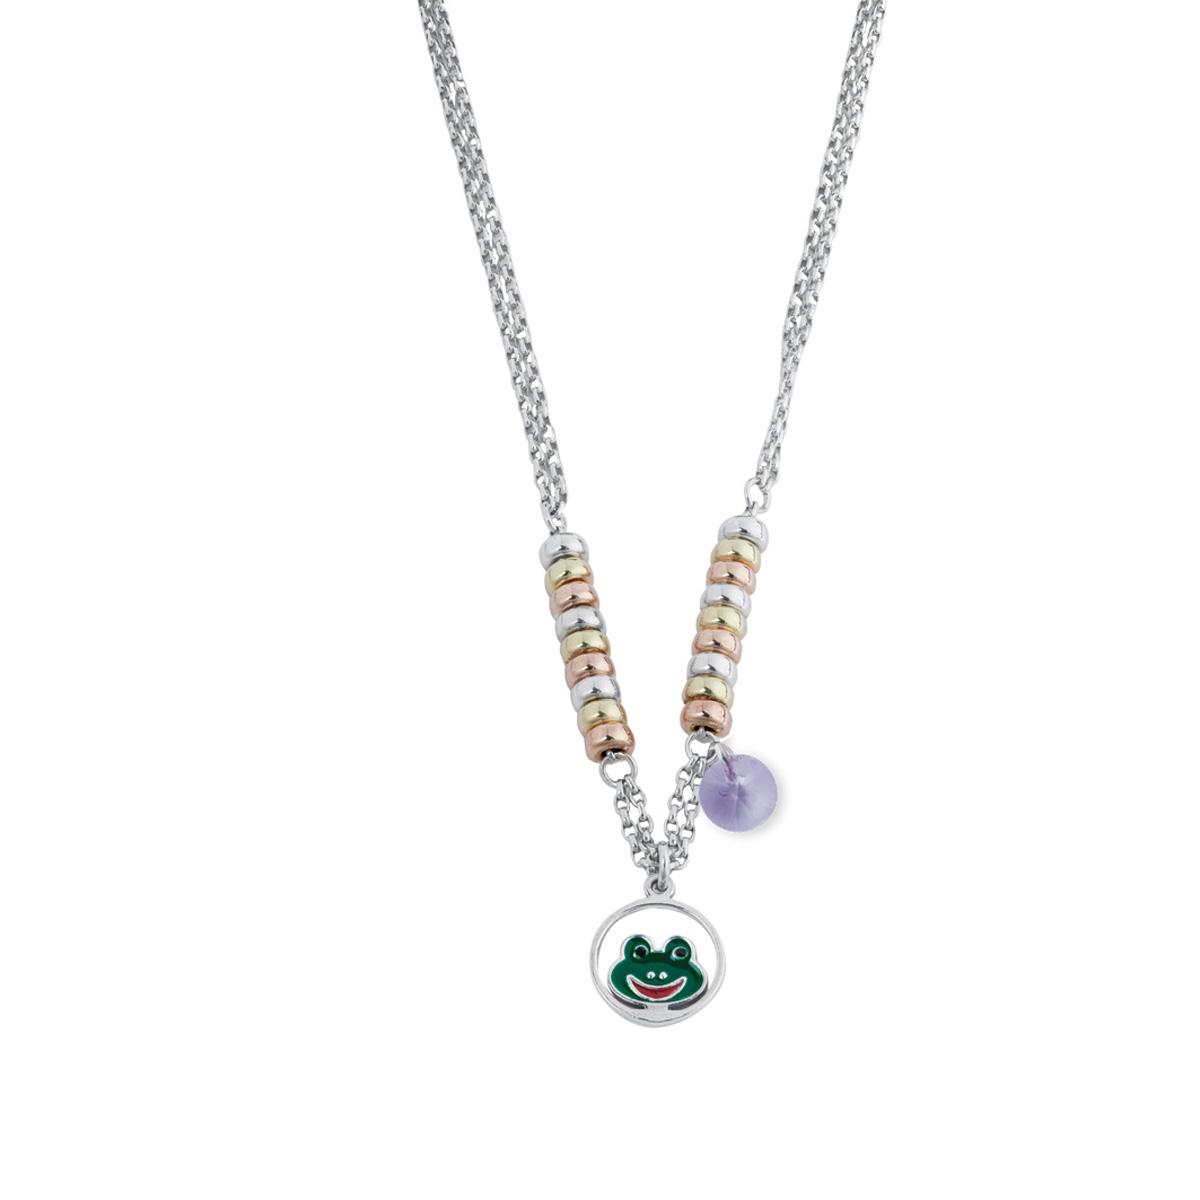 Necklace in 925 rhodium-plated silver, gold-plated enamel and Swarovski ™ - ZCL622-M2